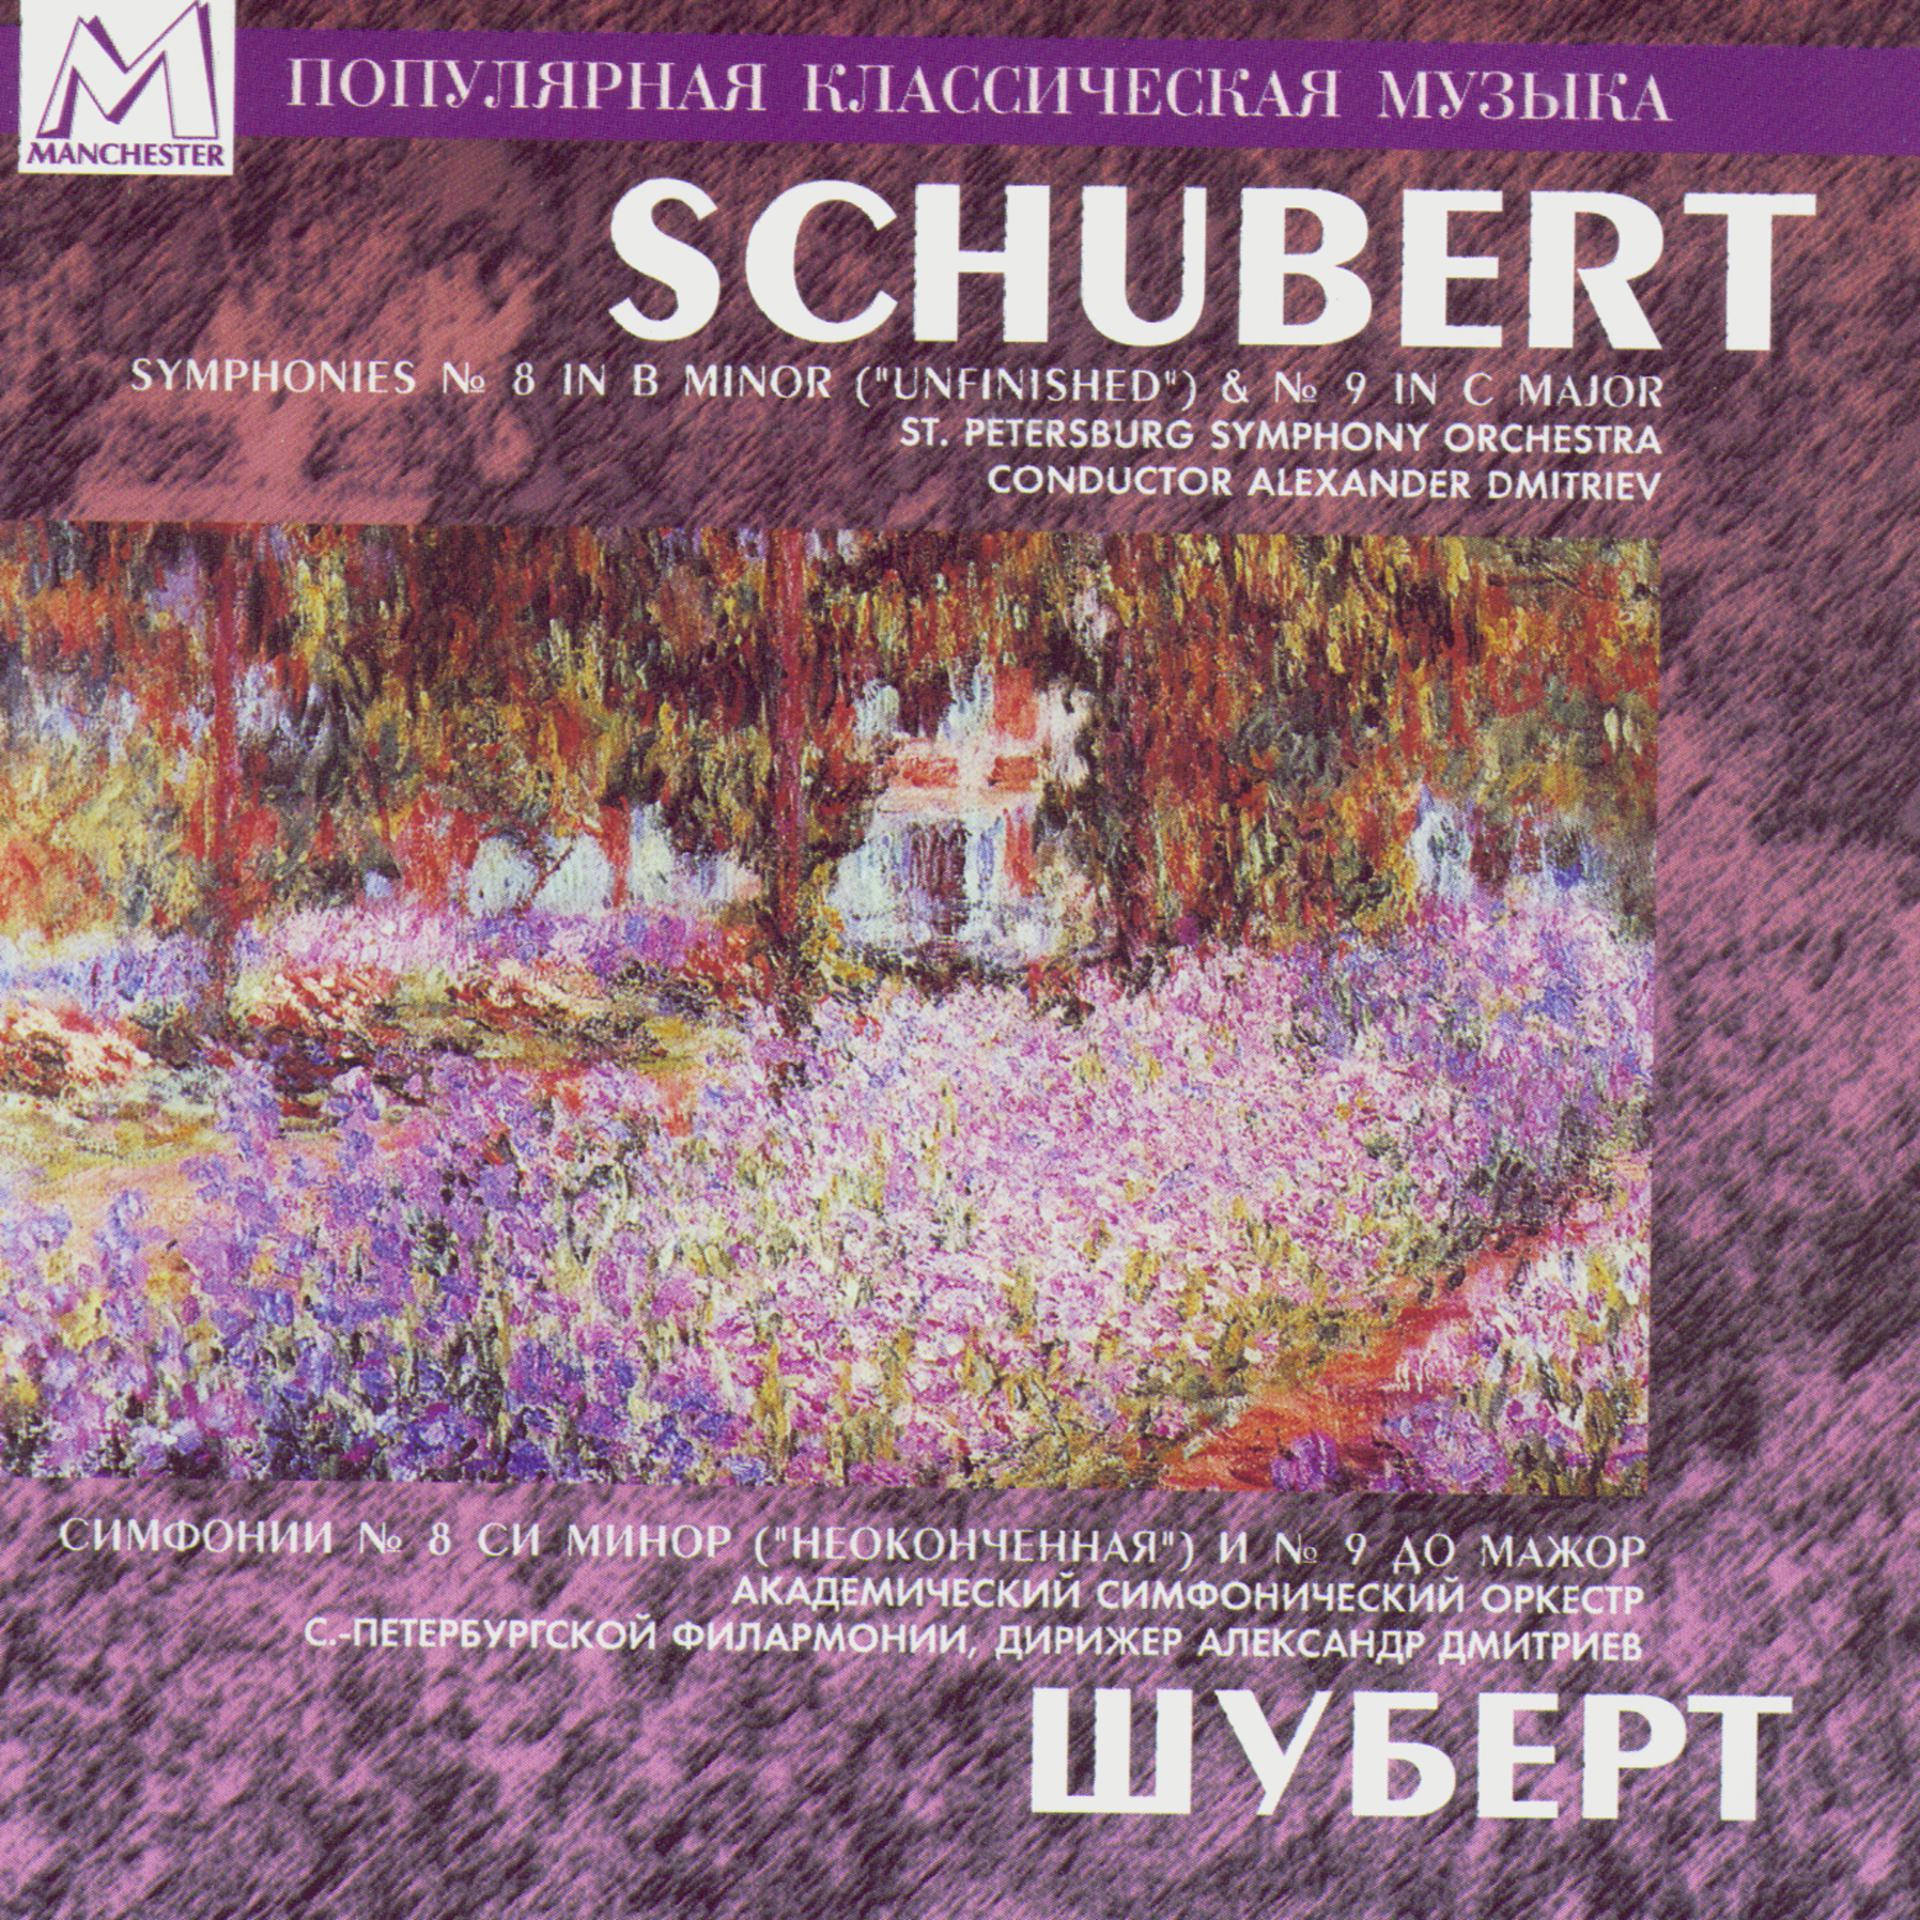 Постер альбома Schubert: Symphony No.8 in B Minor, D.759 "Unfinished" - Symphony No.9 in C Major, D.944 "Great"